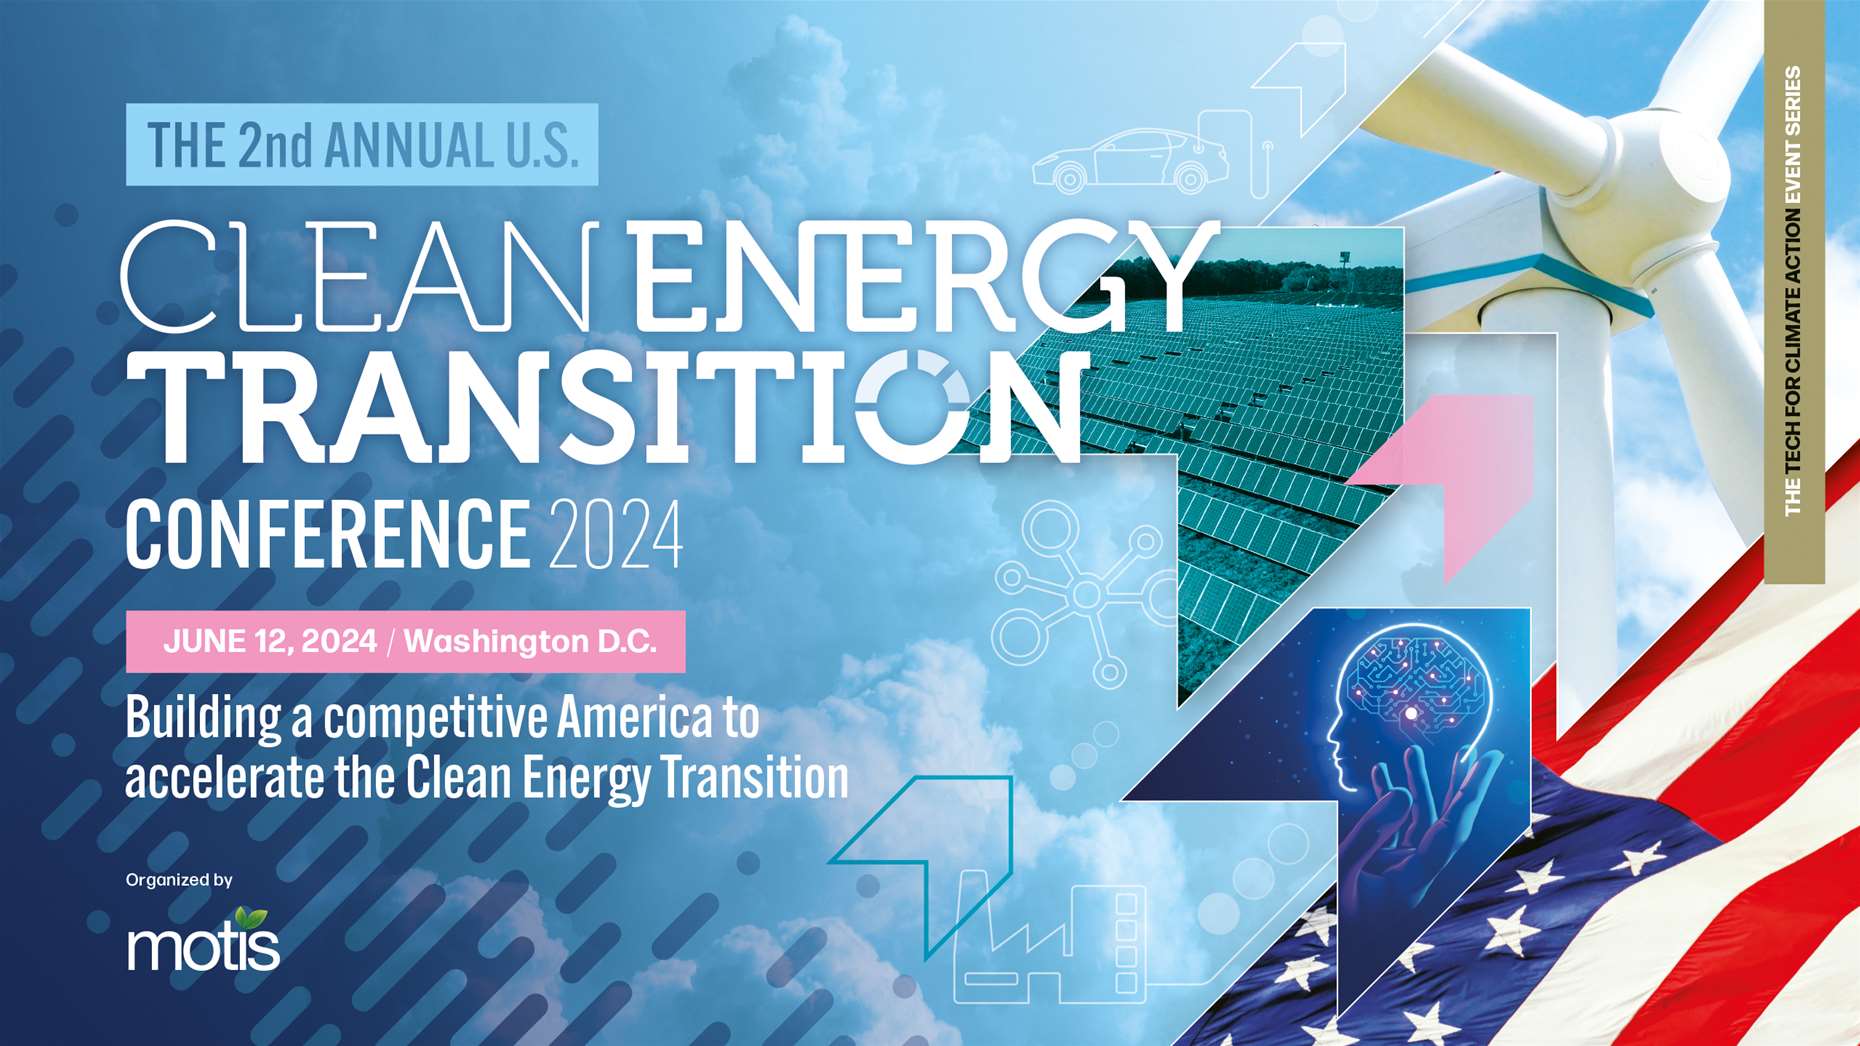 The U.S. Clean Energy Transition conference 